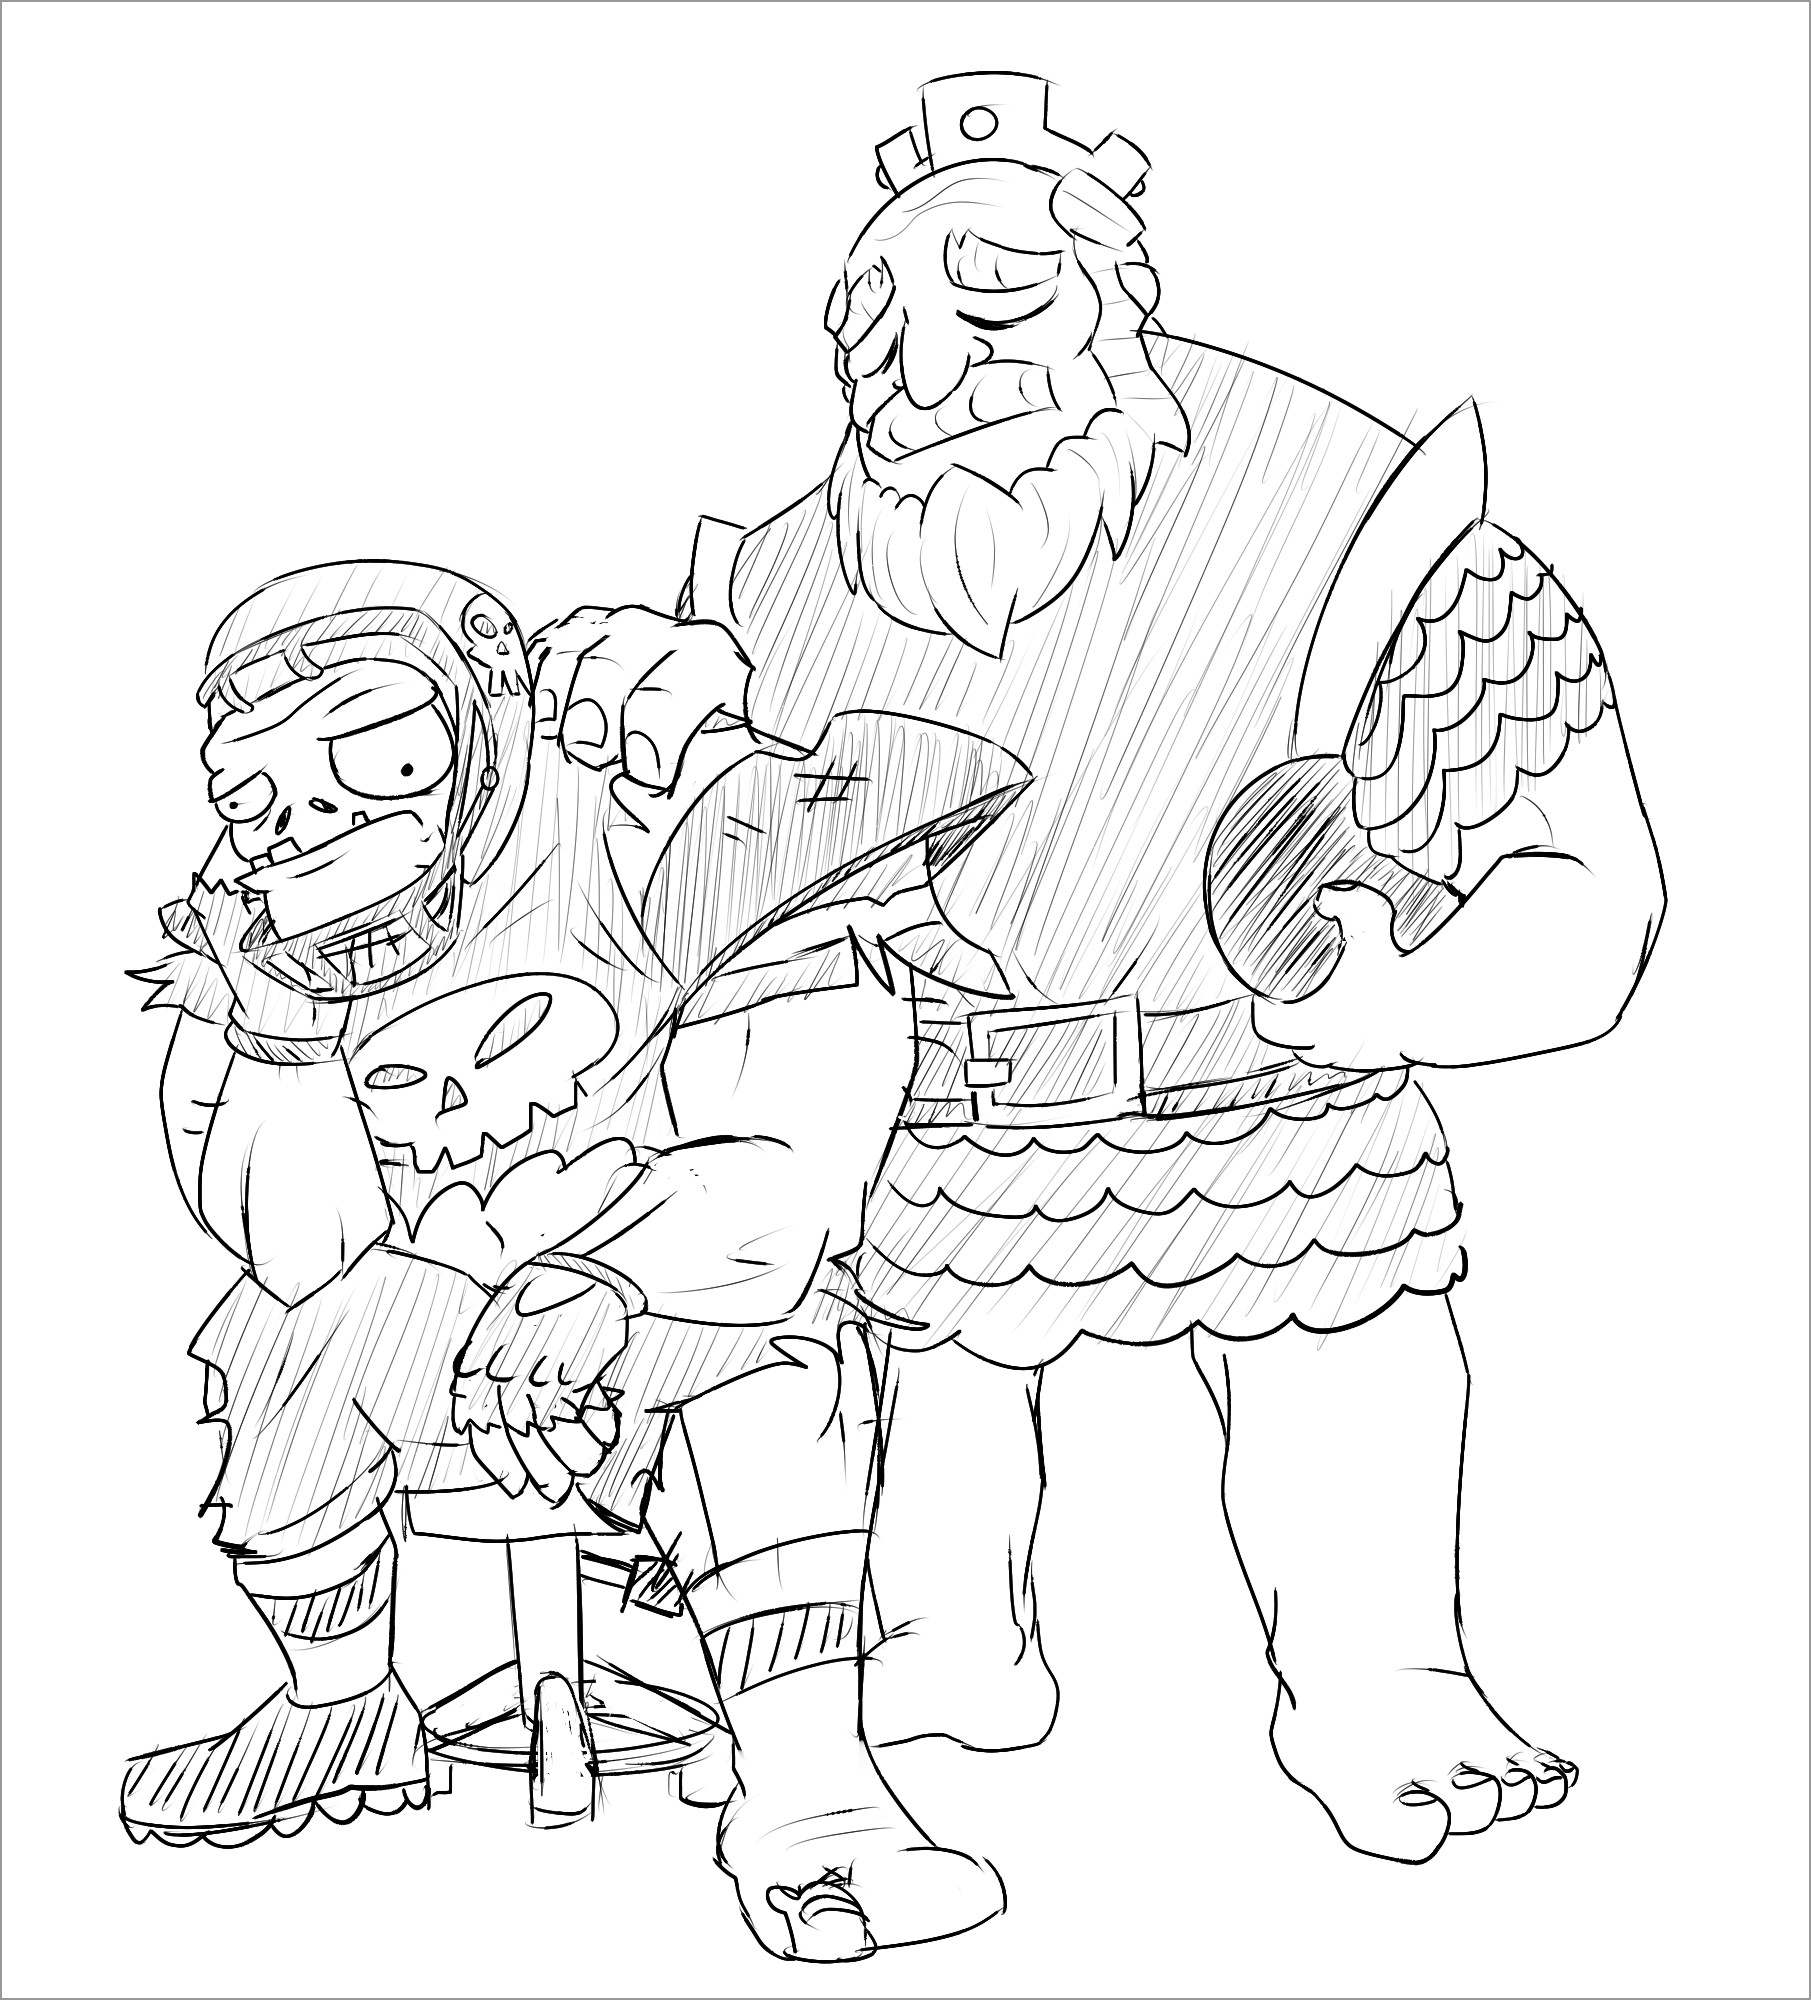 Coloring Pages : Crammed Clash Roy Of Clans Coloring Page ...